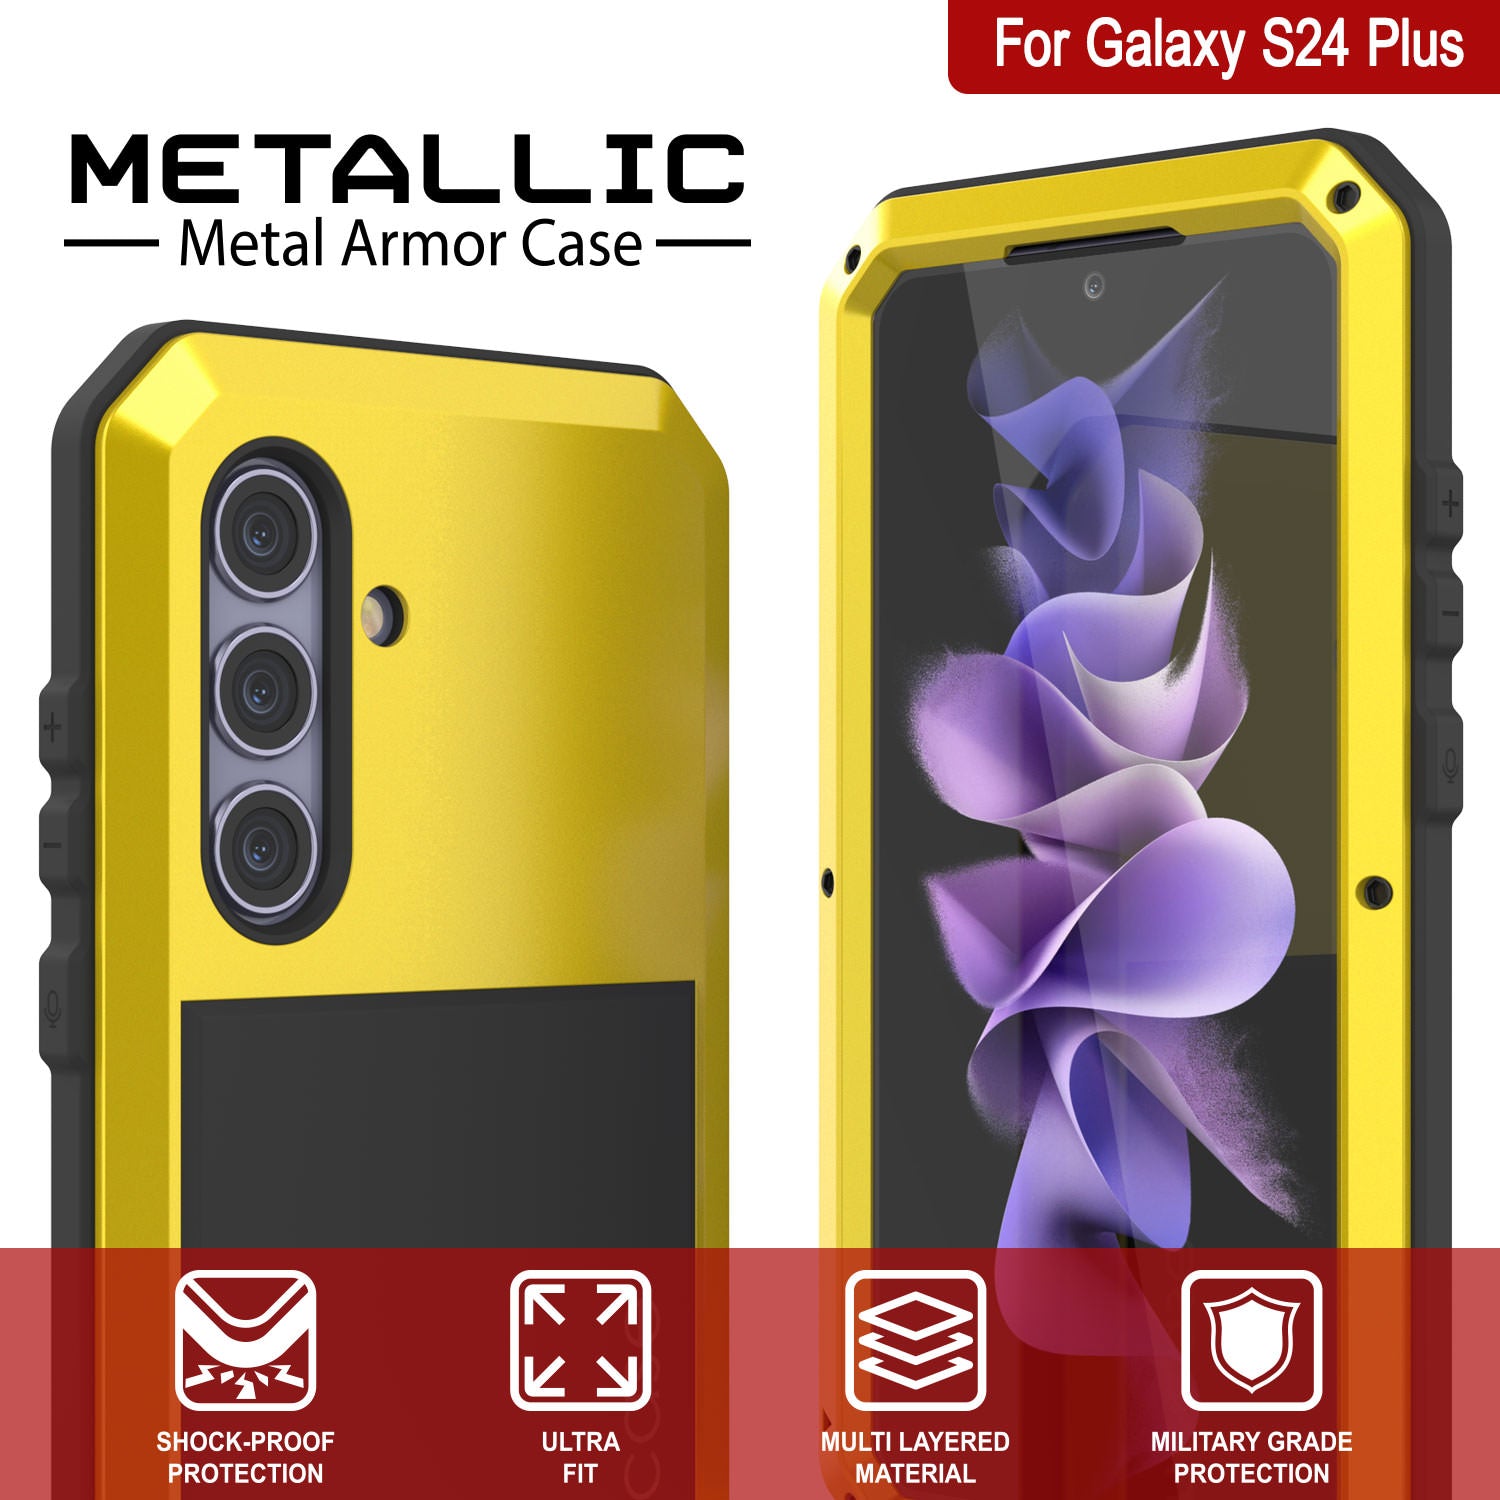 Galaxy S24 Plus Metal Case, Heavy Duty Military Grade Armor Cover [shock proof] Full Body Hard [Yellow]